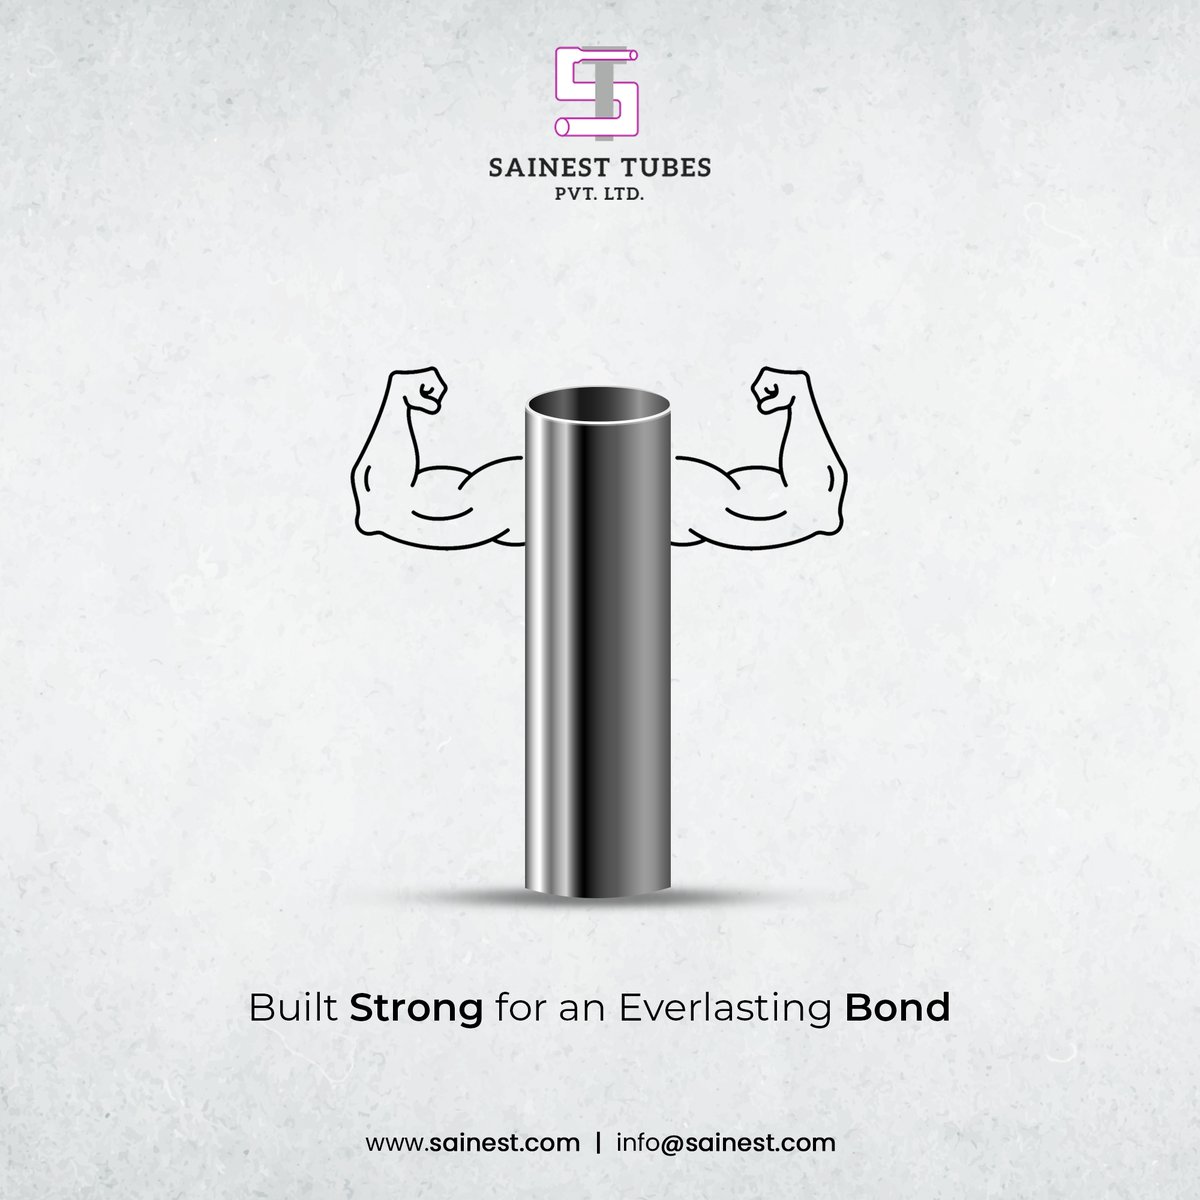 At Sainest, we ensure that our pipes withstand every challenge of strength and make your day-to-day operations seamless and efficient. 
To know more, visit our website link in the bio.

#IndustrialPipes #PipeManufacturing #SainestTubes #SainestTubesPvtLtd